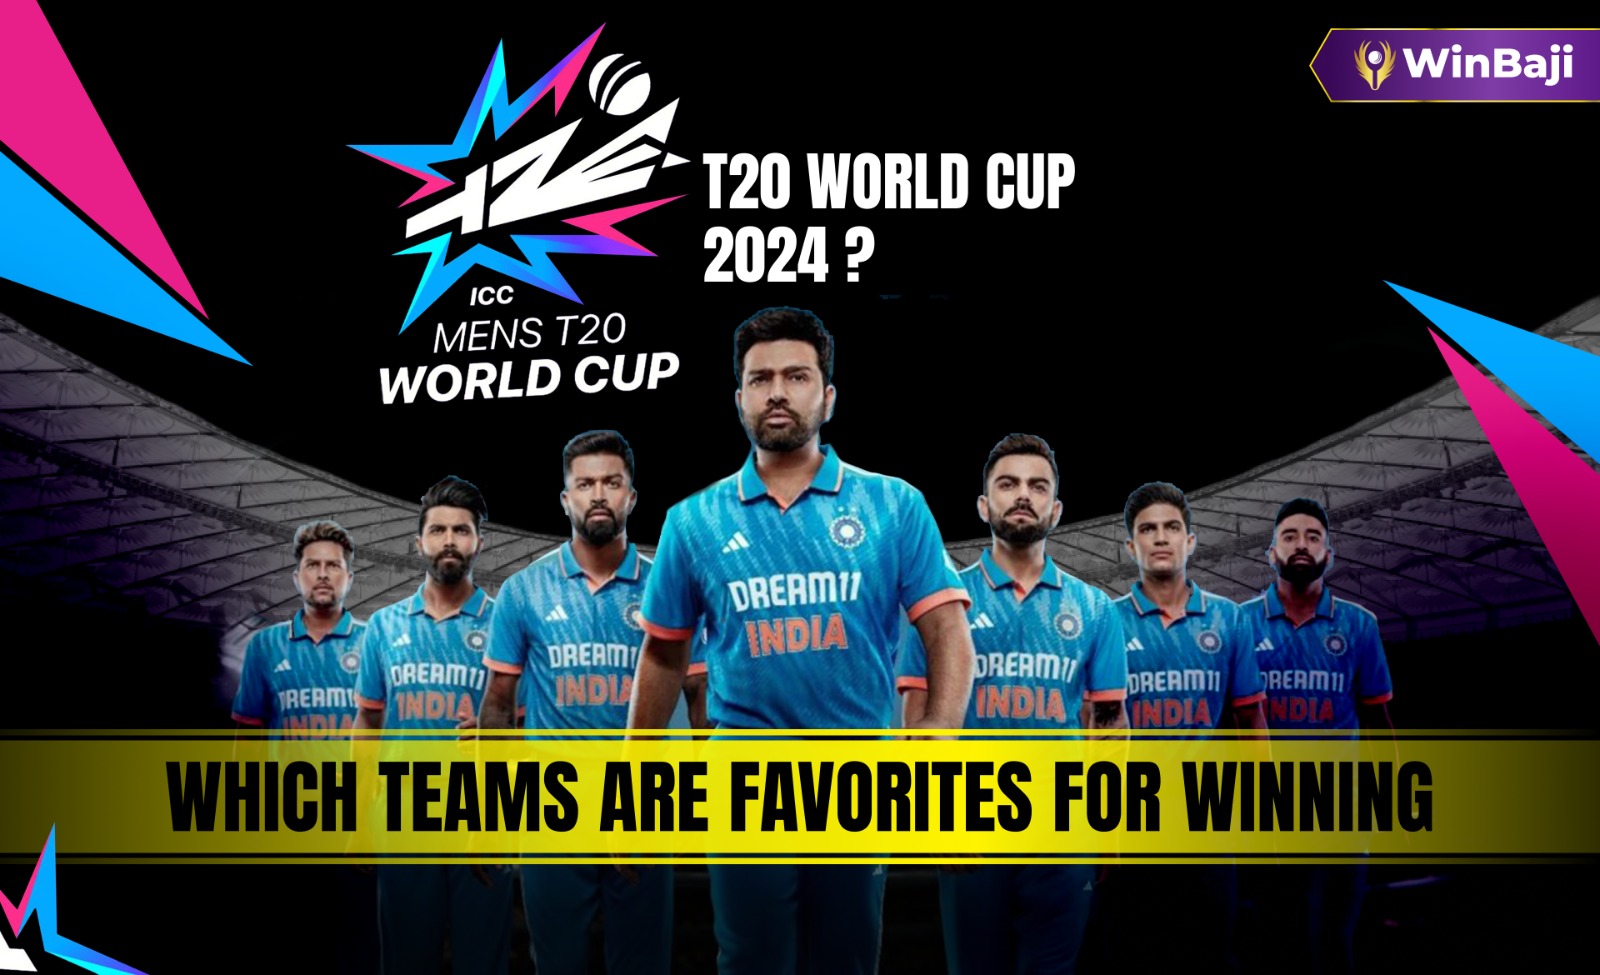 Which Teams are Favorites for Winning the T20 World Cup in 2024?